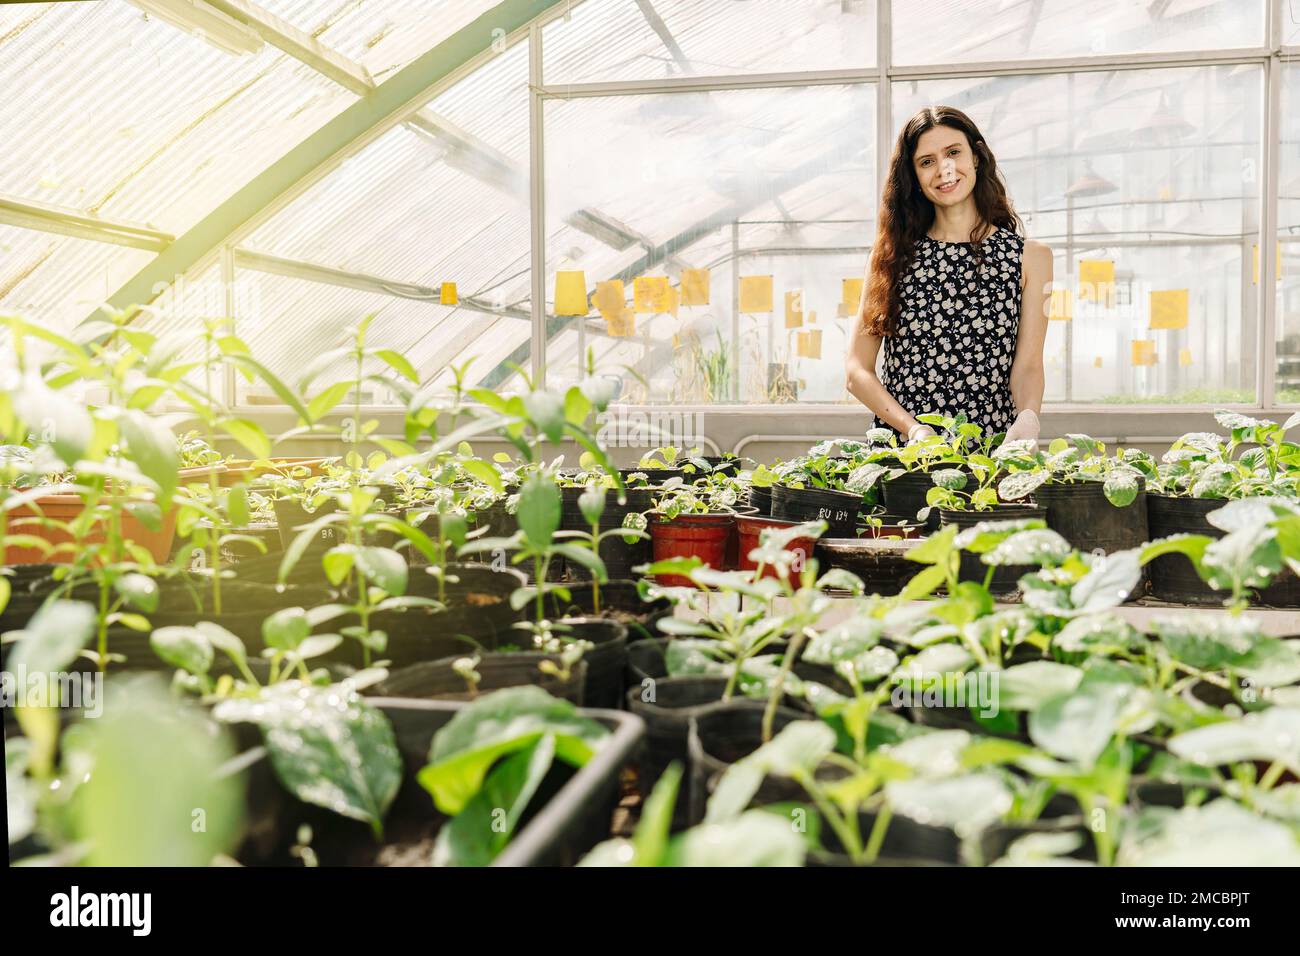 Female scientist examining plants in a greenhouse standing smiling and looking at camera. Large General View Stock Photo